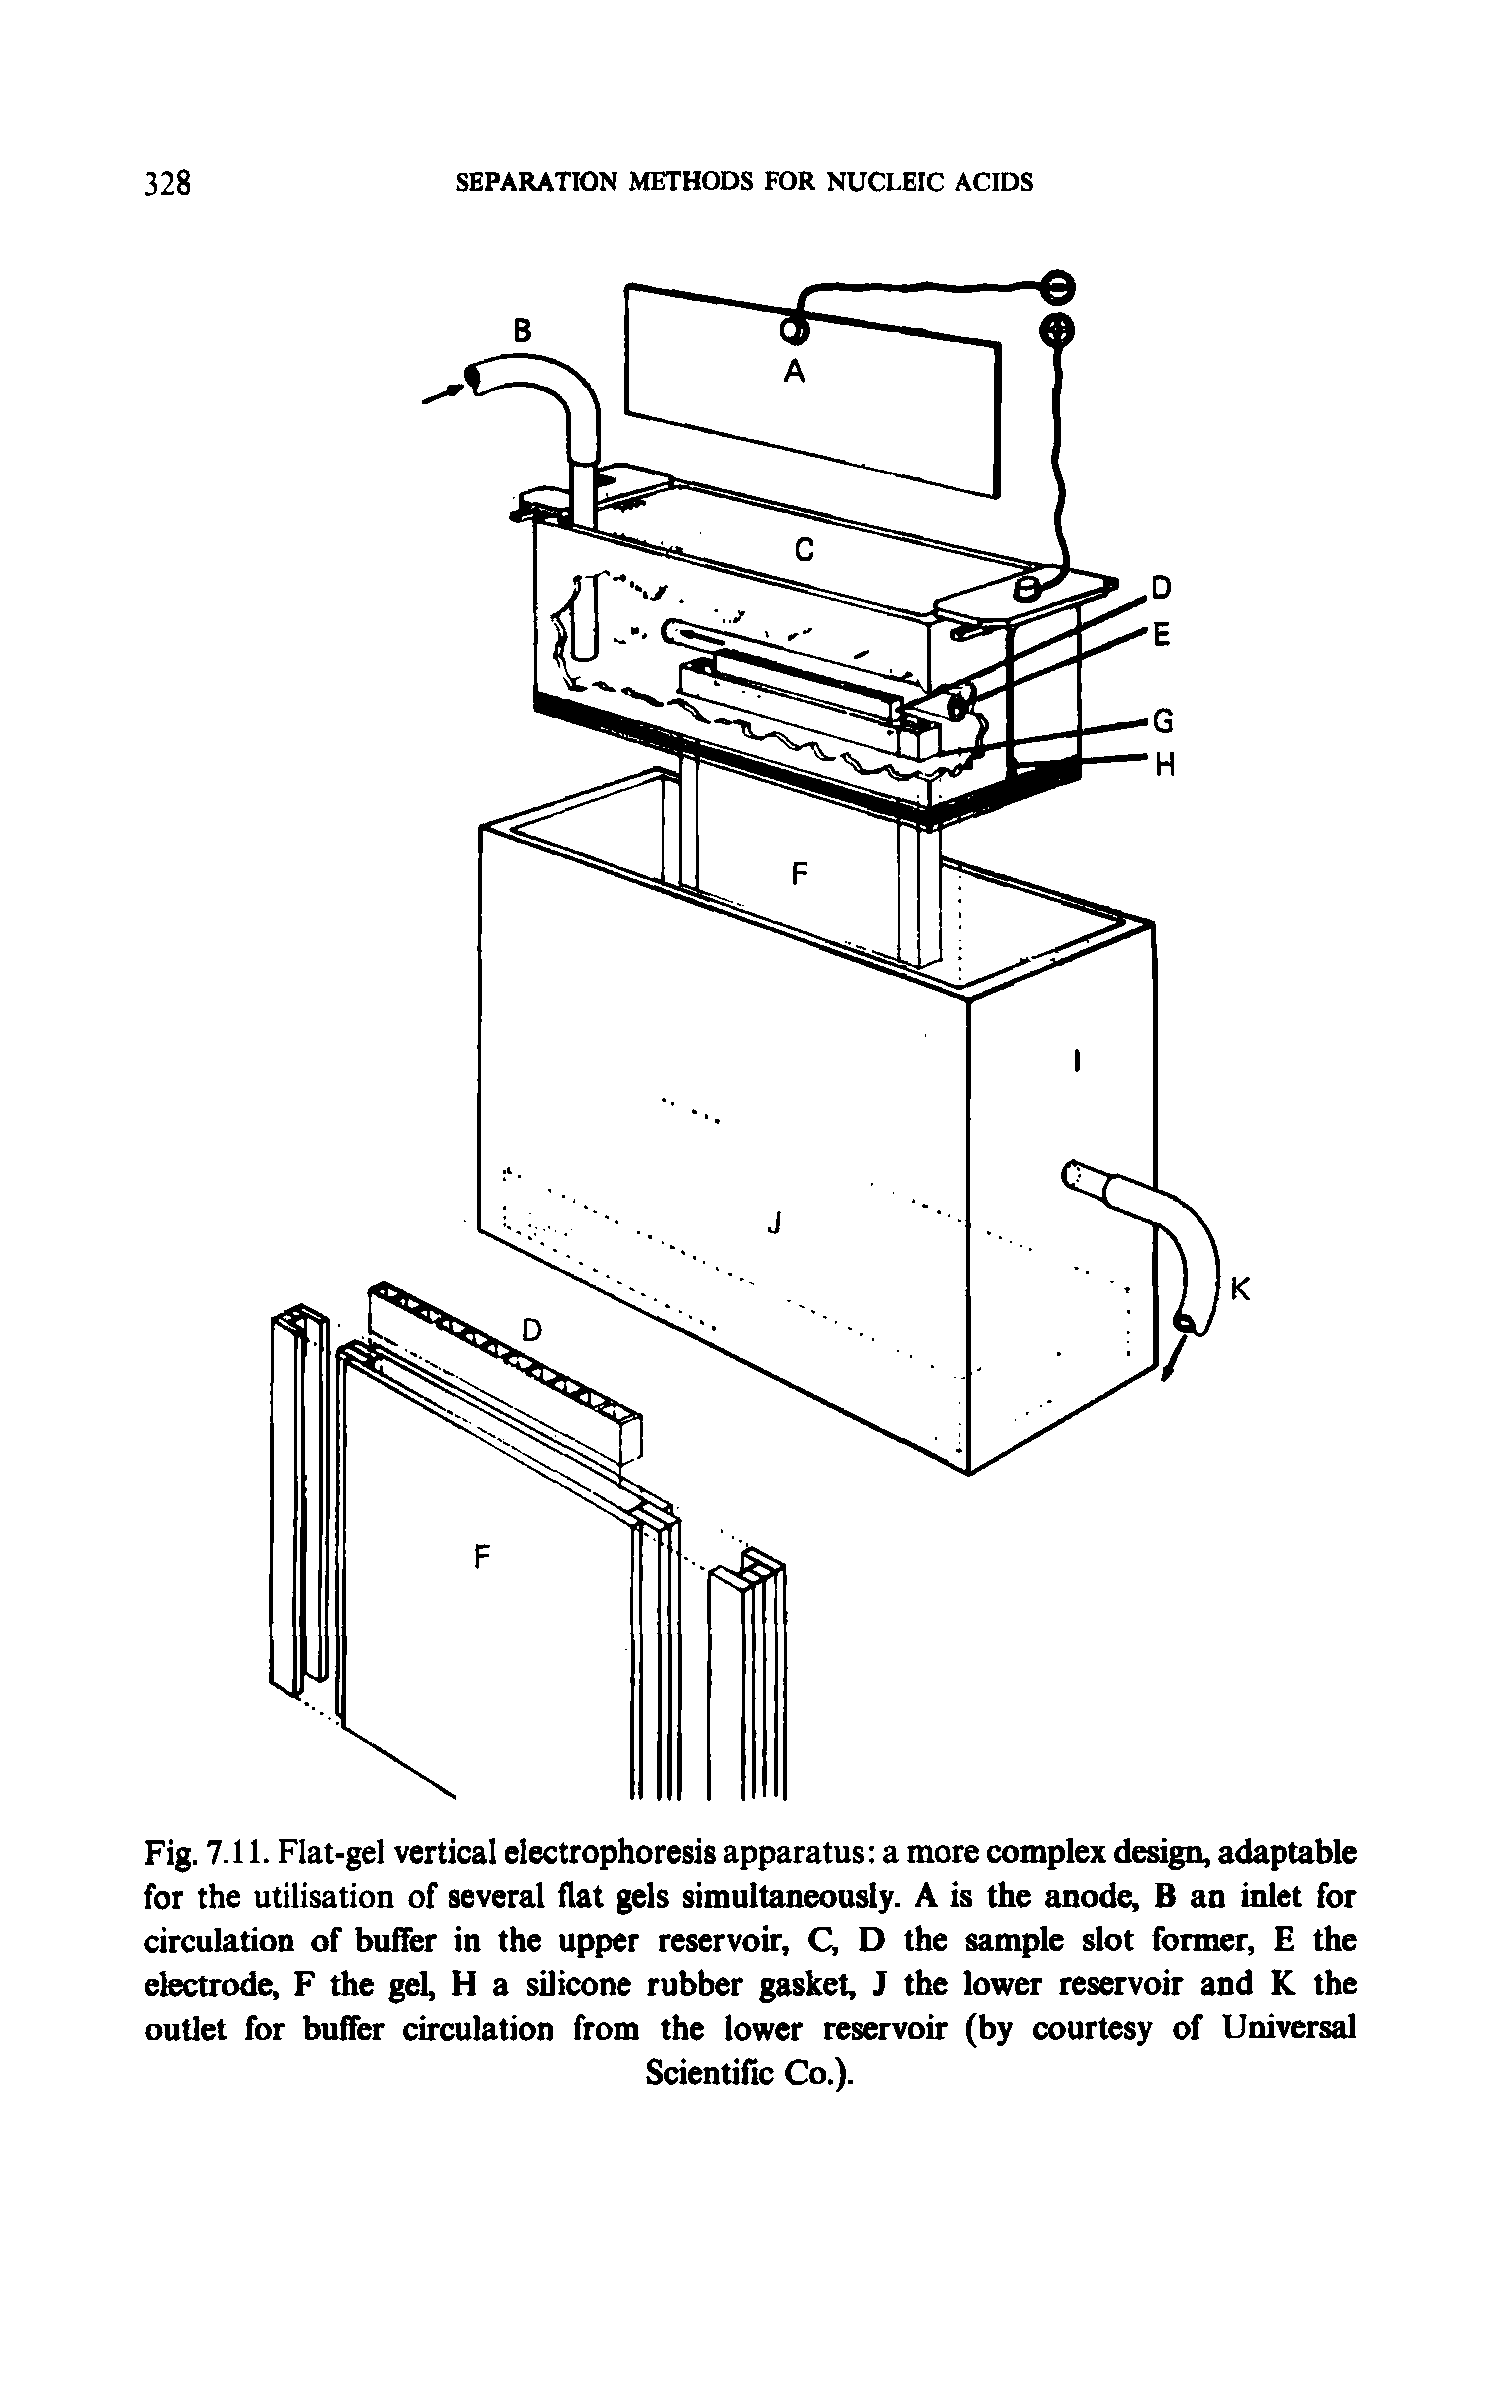 Fig. 7.11. Flat-gel vertical electrophoresis apparatus a more complex design, adaptable for the utilisation of several flat gels simultaneously. A is the anode, B an inlet for circulation of buffer in the upper reservoir, C, D the sample slot former, E the electrode, F the gel, H a sUicone rubber gasket, J the lower reservoir and K the outlet for buffer circulation from the lower reservoir (by courtesy of Universal...